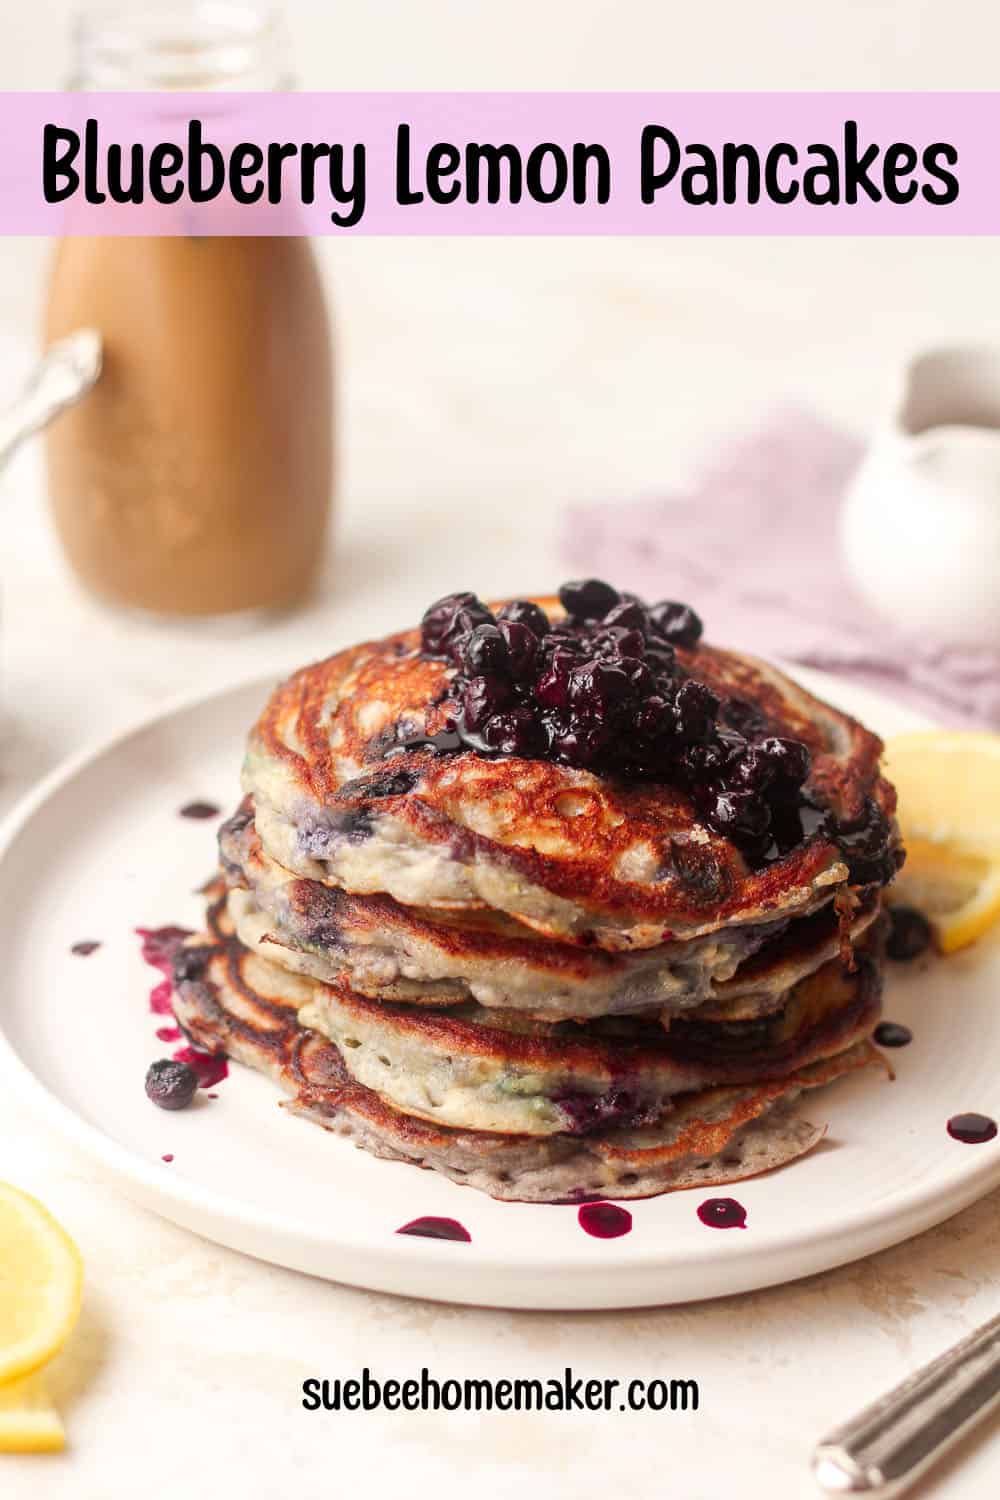 A plate of blueberry lemon pancakes with some blueberry compote on top.